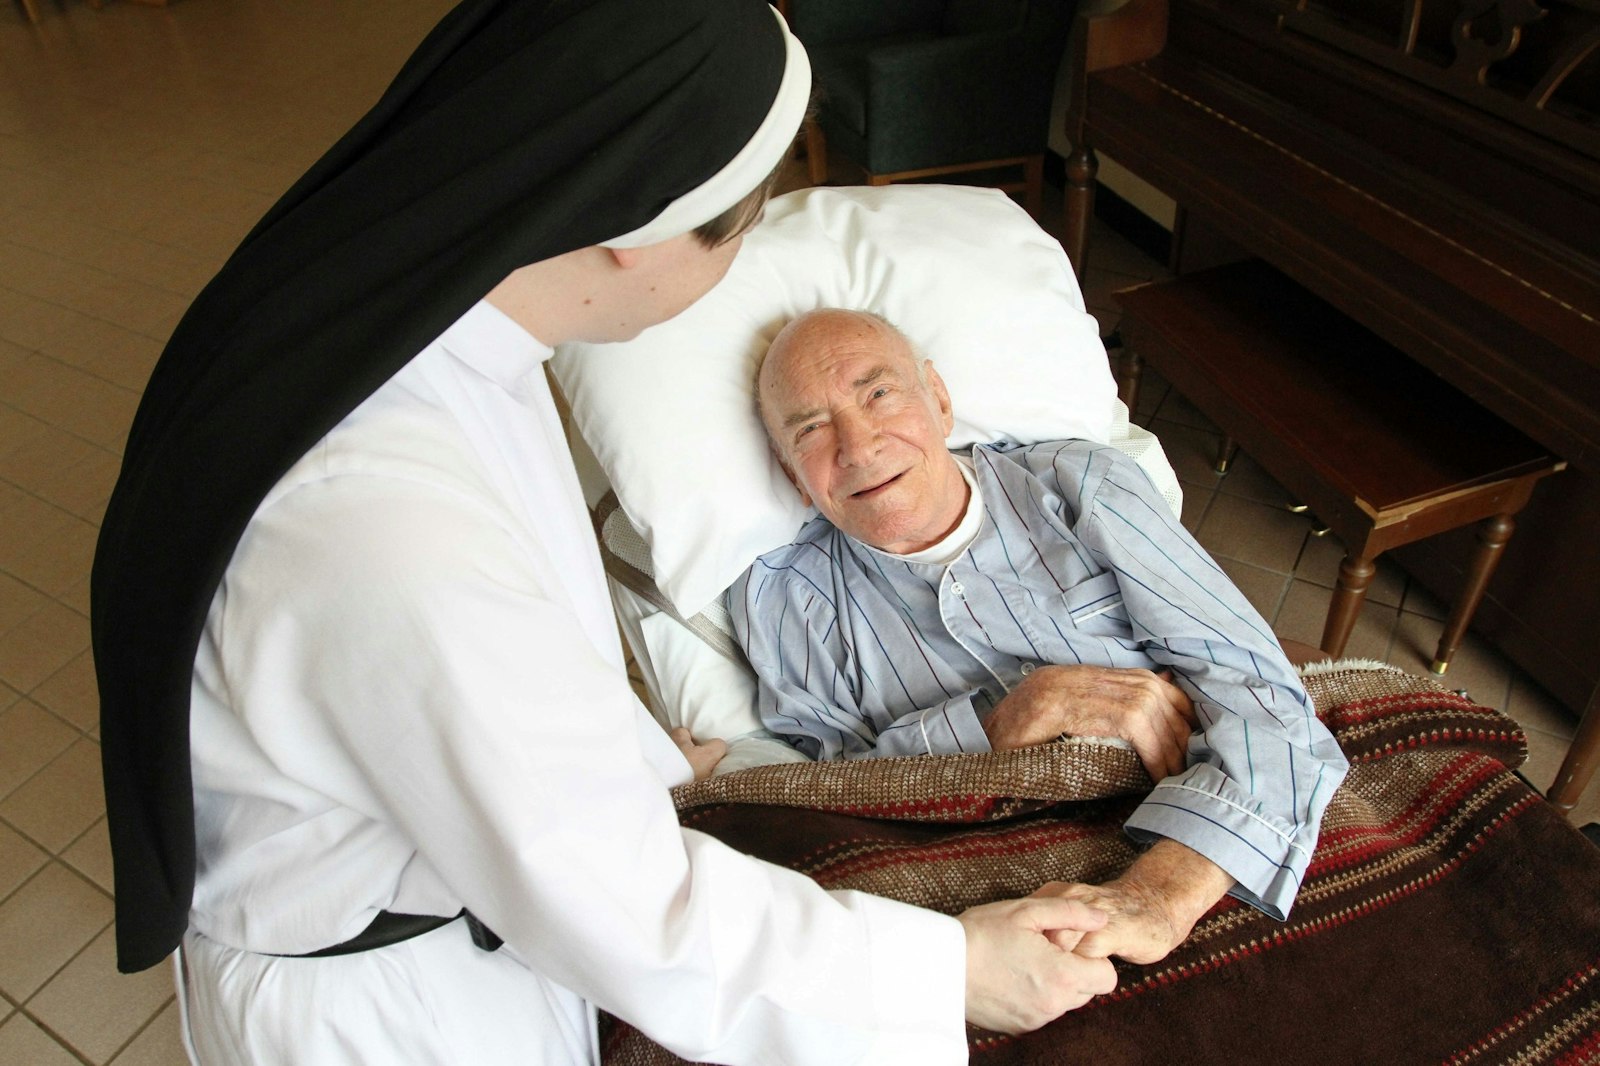 A patient is pictured in a file photo chatting with a nun at Rosary Hill Home, a Dominican-run facility in Hawthorne, N.Y., that provides palliative care to people with incurable cancer and have financial need. (CNS photo/Gregory A. Shemitz)